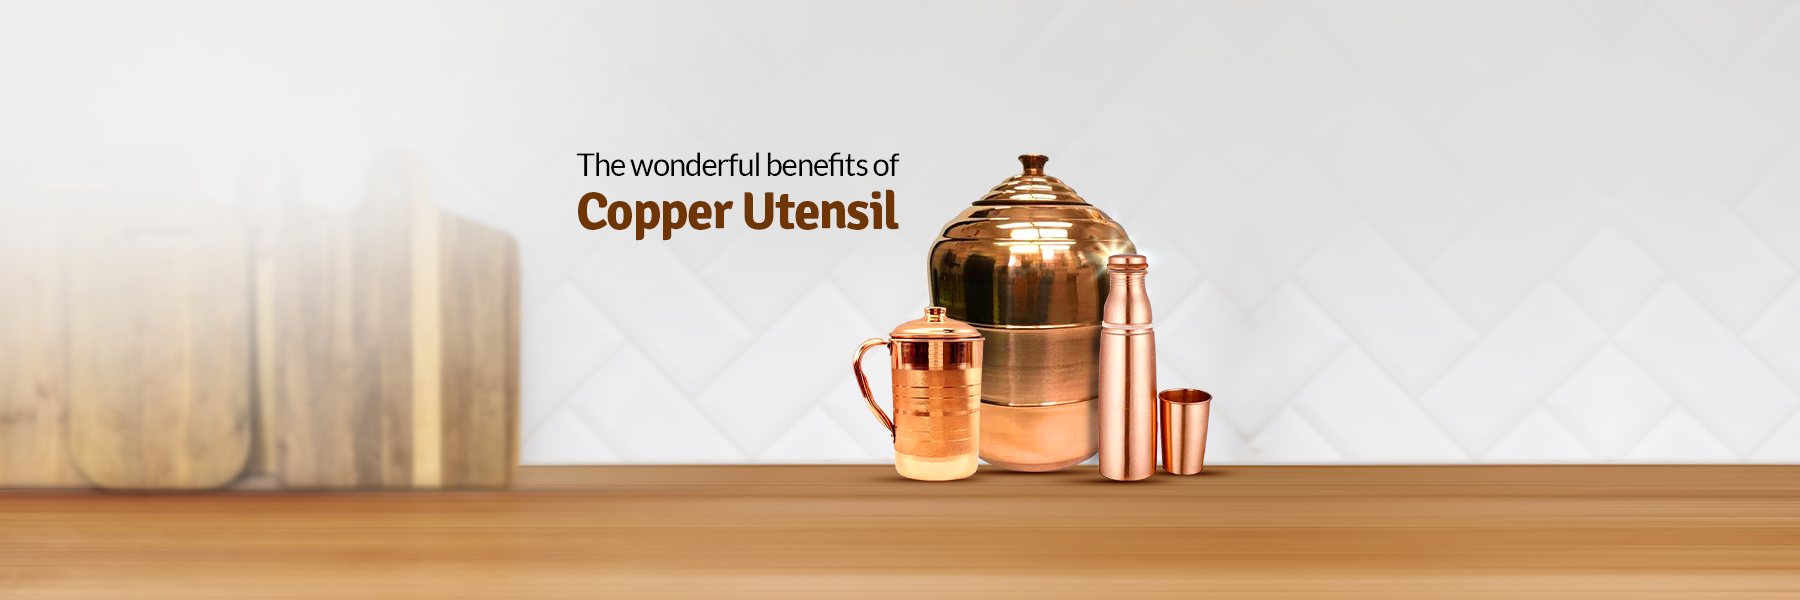 The Wonderful Benefits of Copper Utensil FromIndia.com